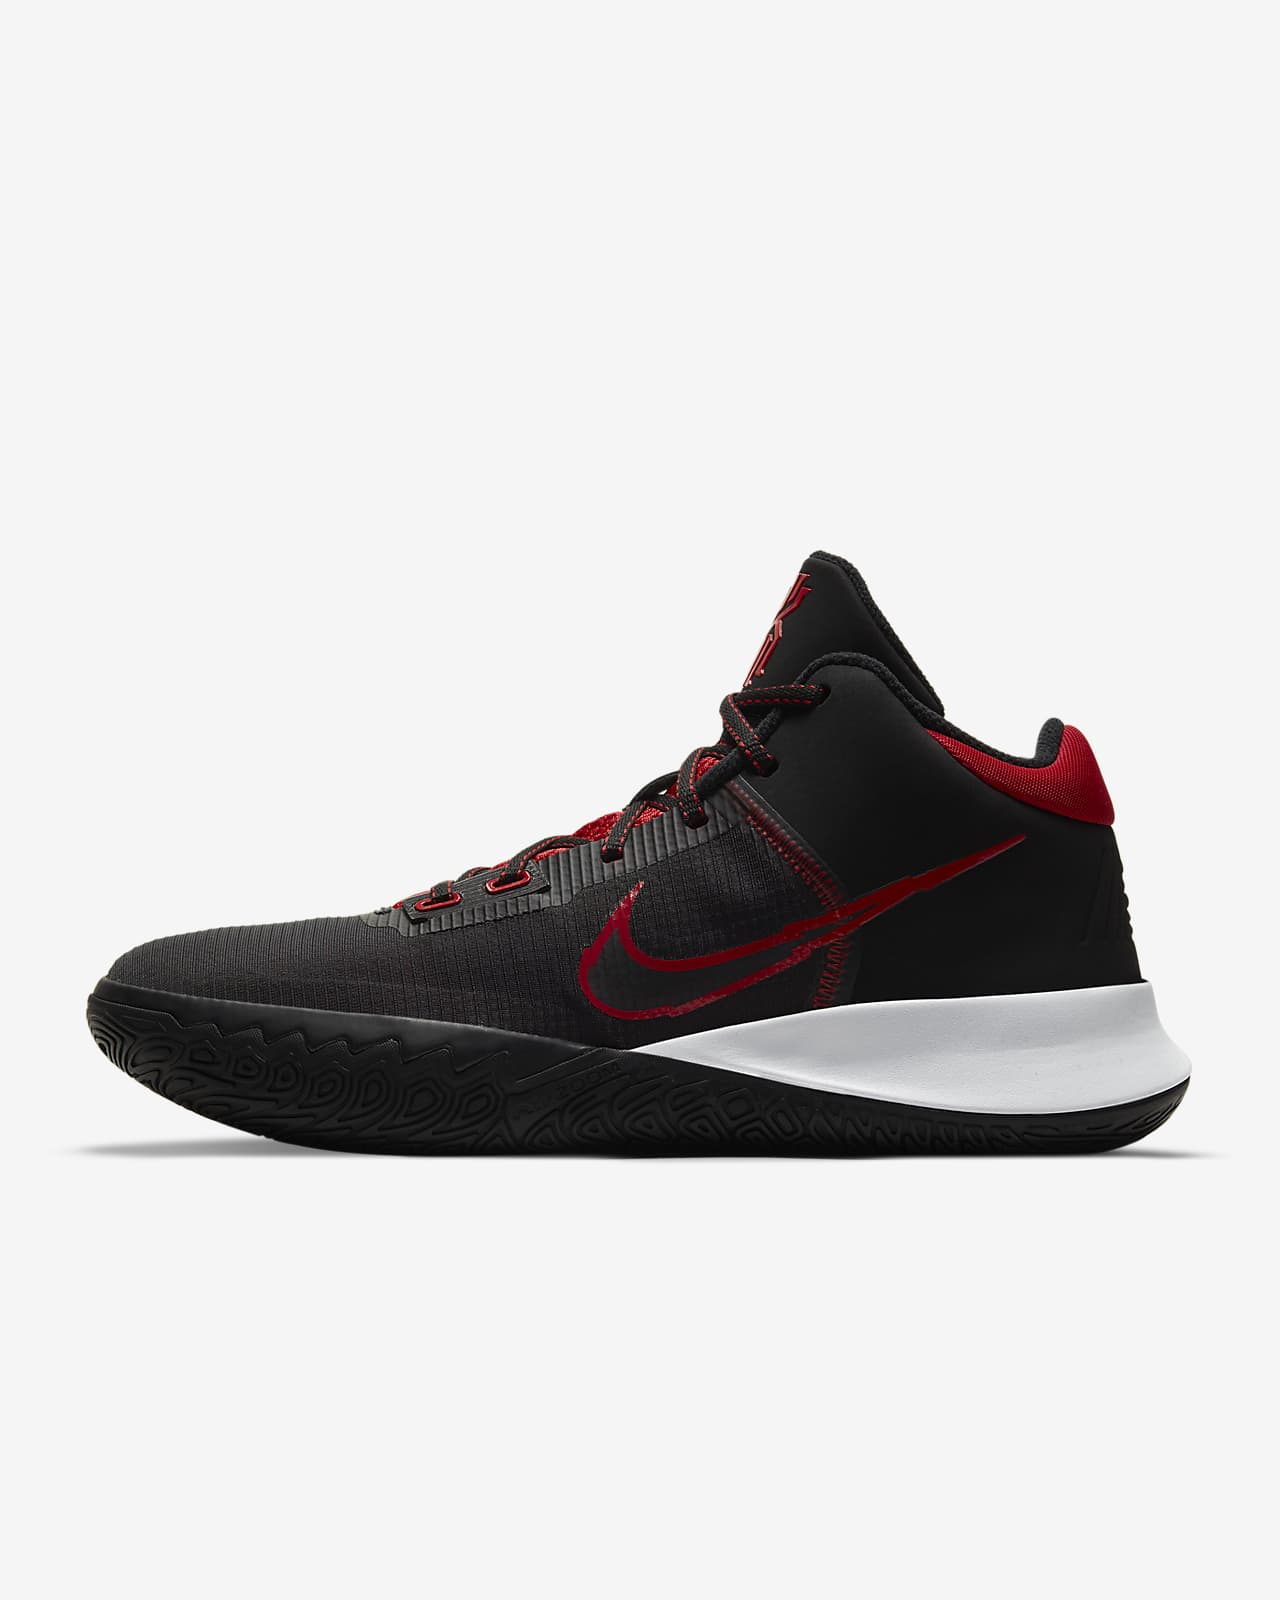 red and black basketball shoes nike